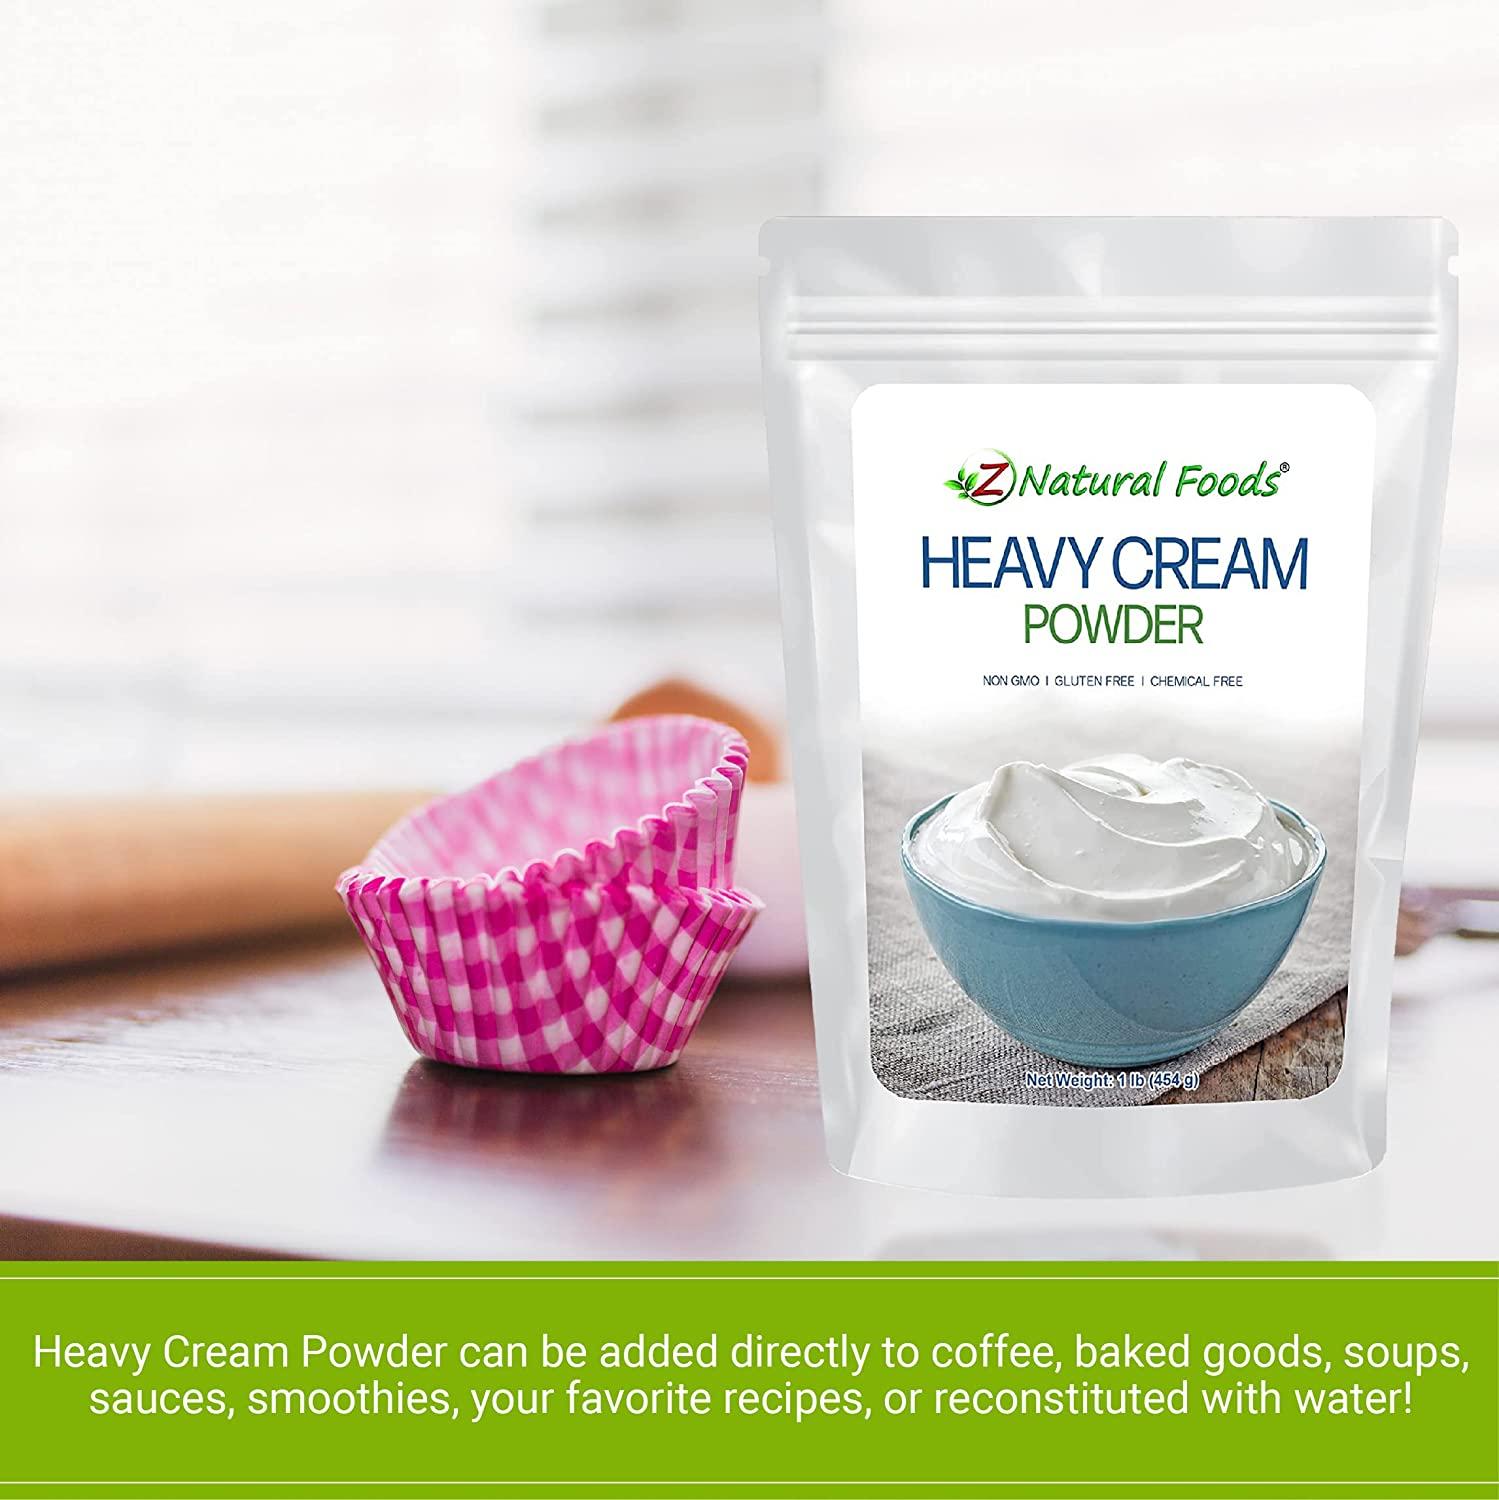 Z Natural Foods Heavy Cream Powder, Nutrient-Rich, Delicious Dry